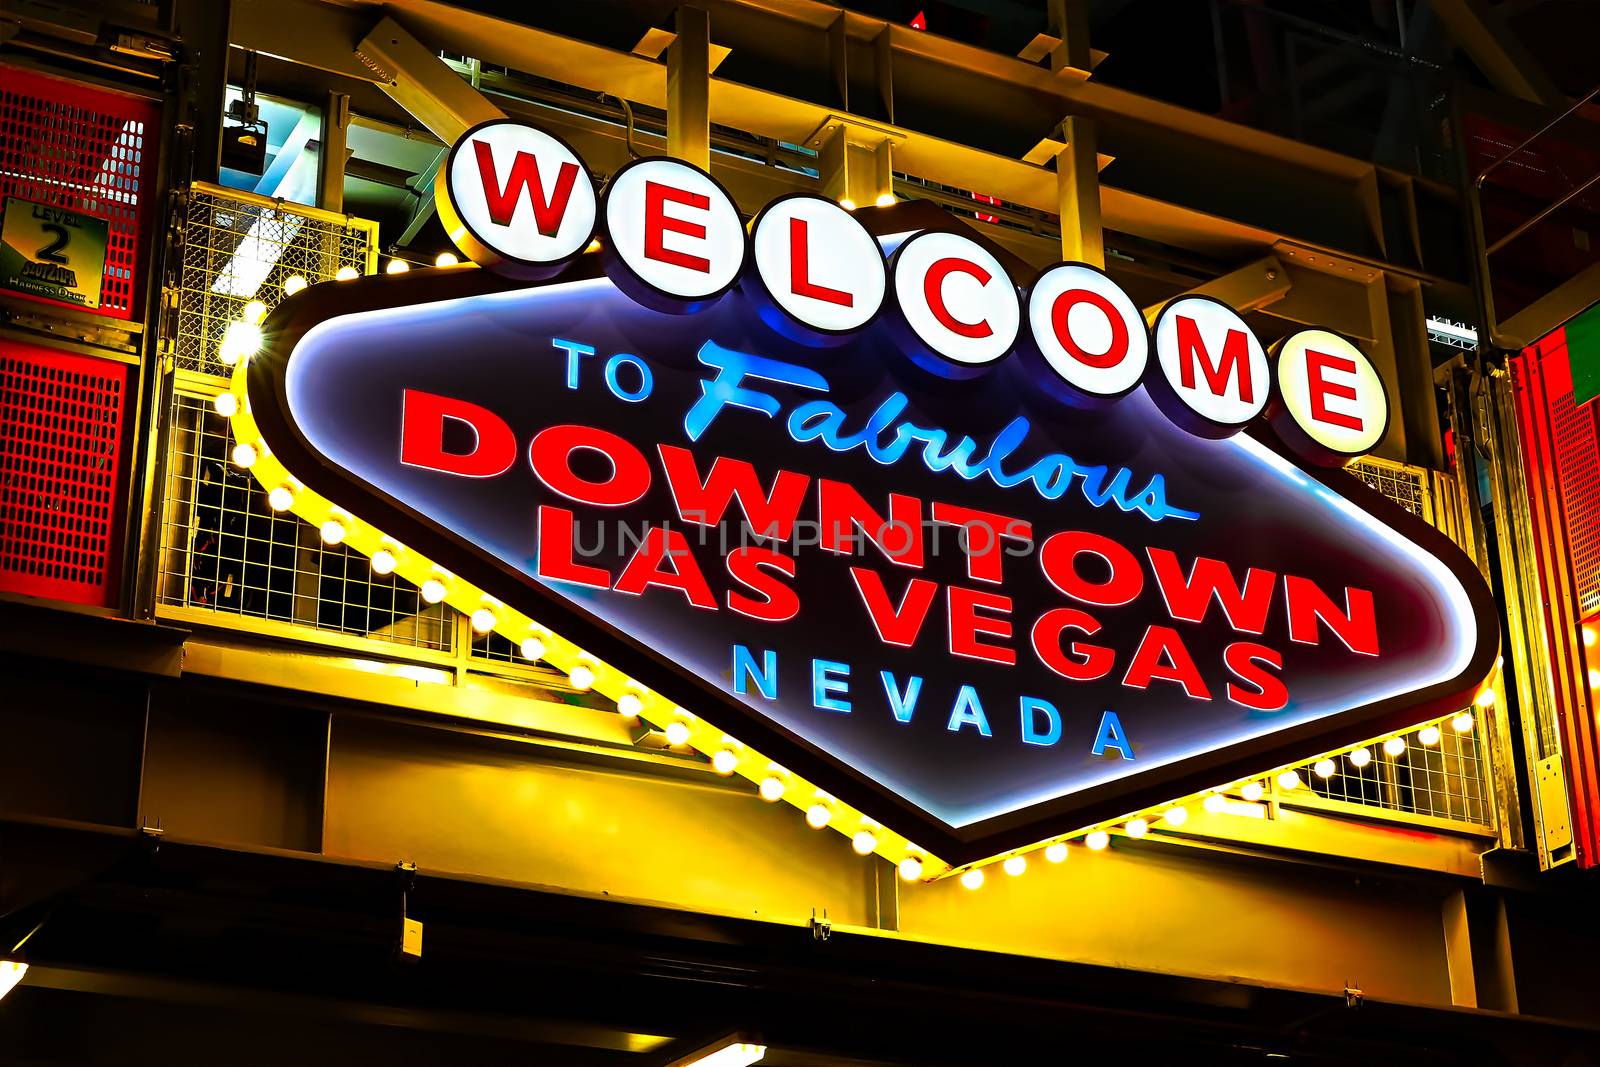 Welcome to Fabulous Downtown Las Vegas sign at Fremont Street in Las Vegas, USA.It is an internationally renowned resort city known primarily for gambling